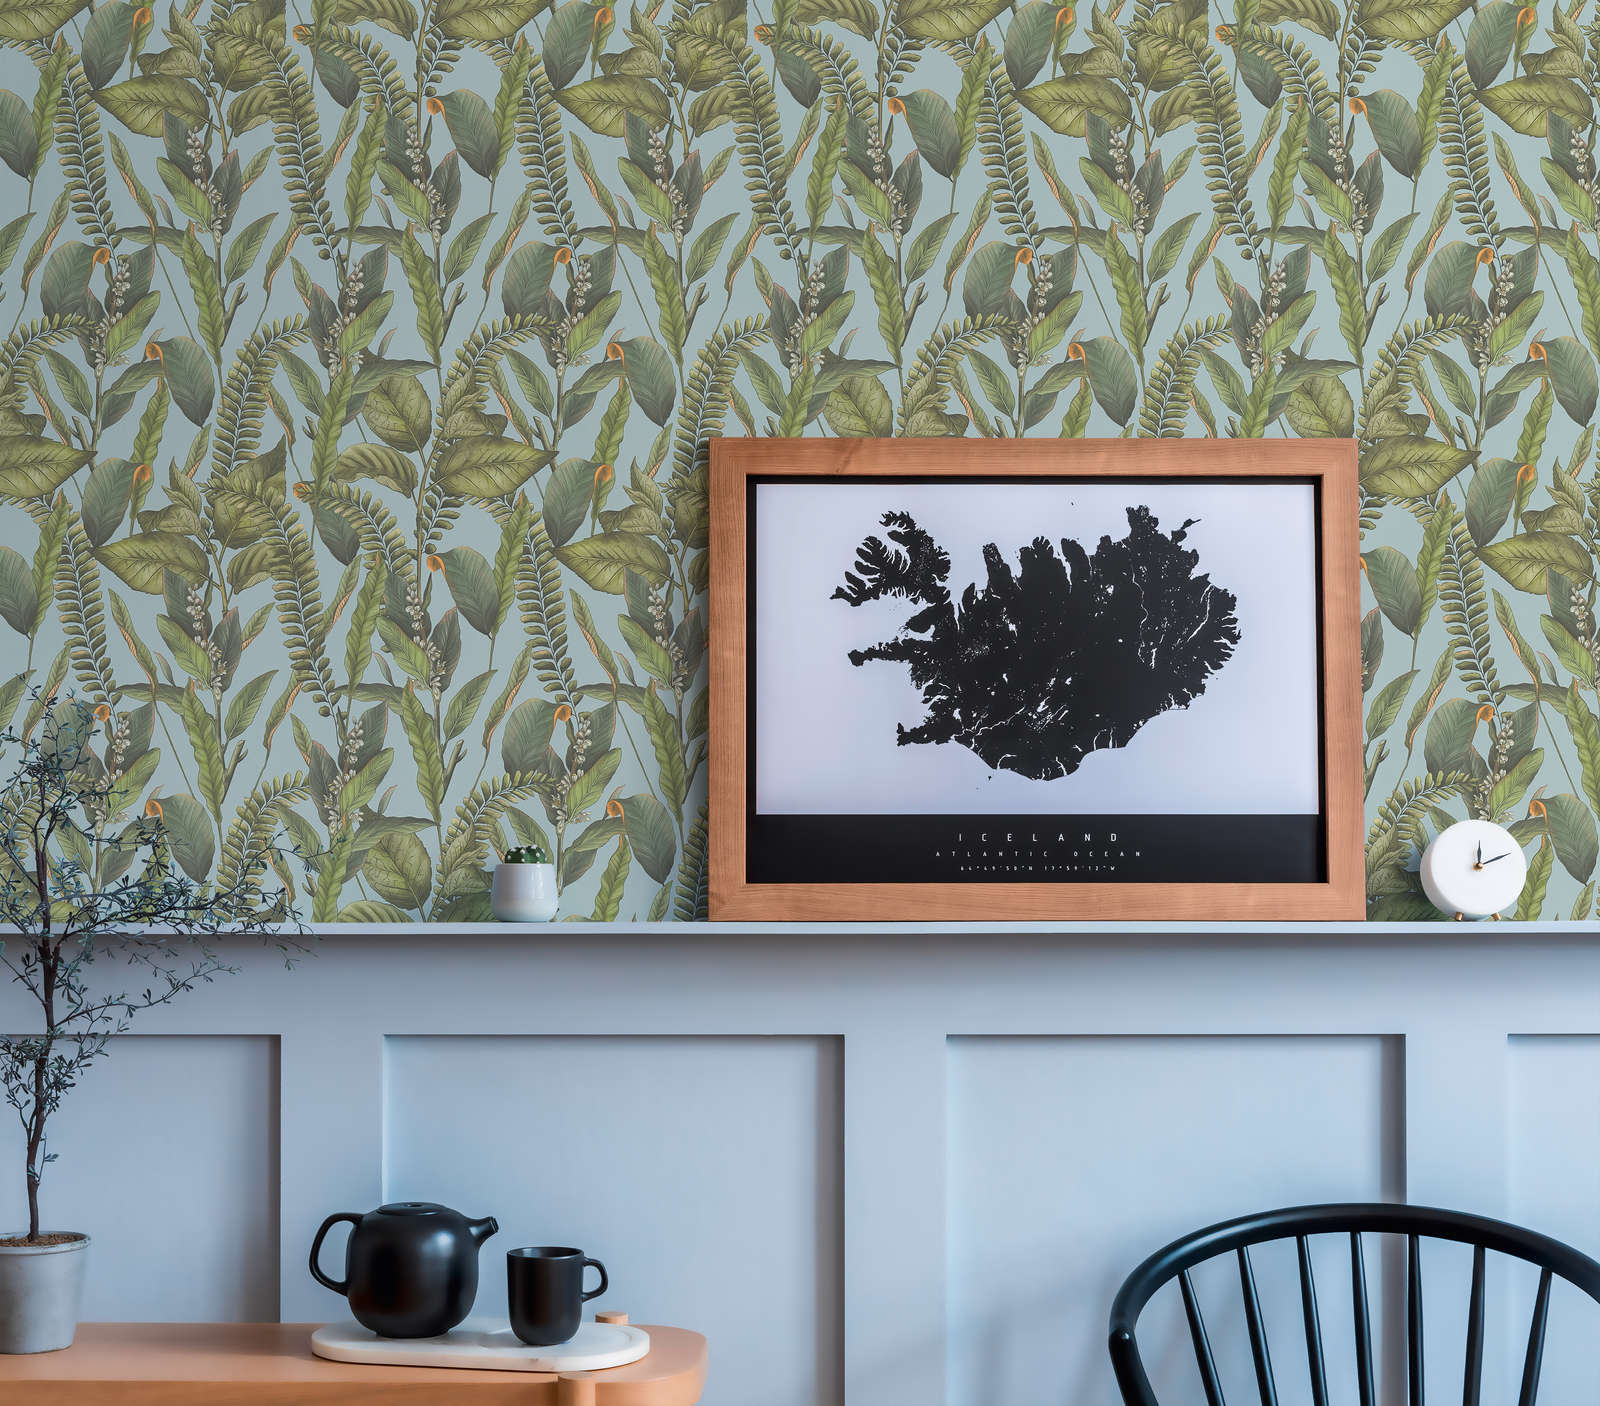             Floral wallpaper in jungle style with leaves & flowers textured matt - blue, green, orange
        